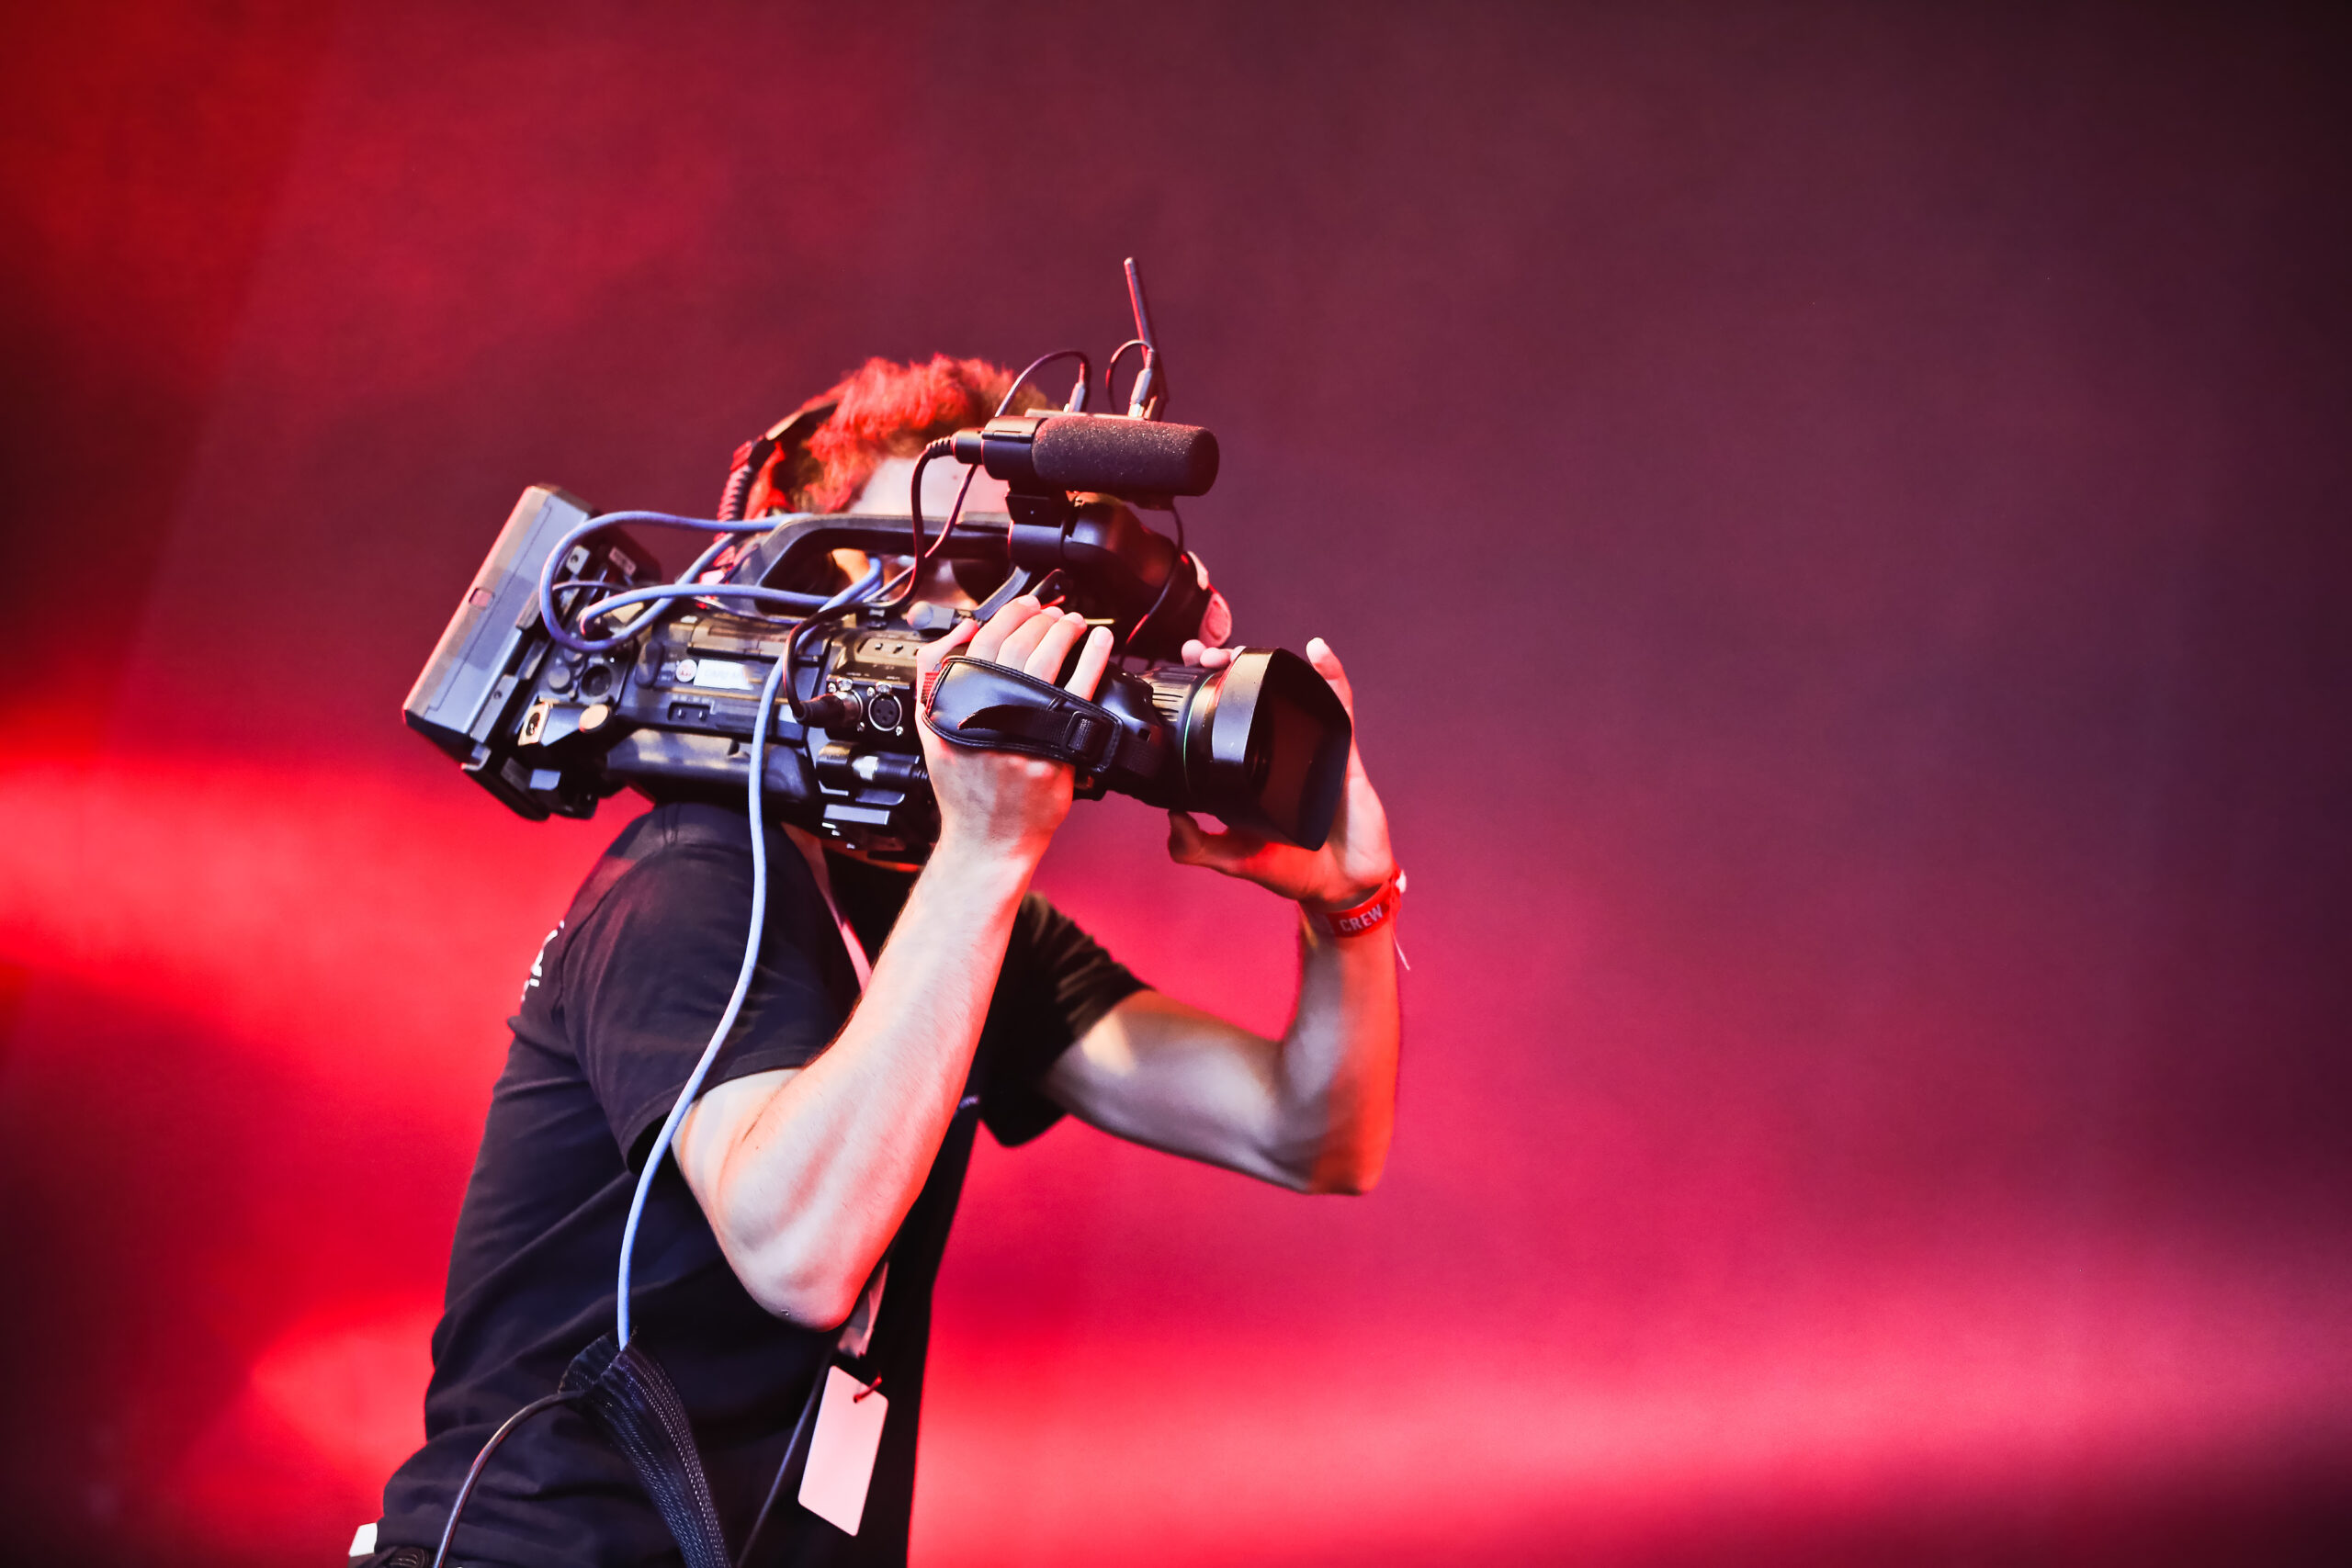 Professional camera operator filming on stage with a shoulder-mounted video camera, set against a red illuminated backdrop